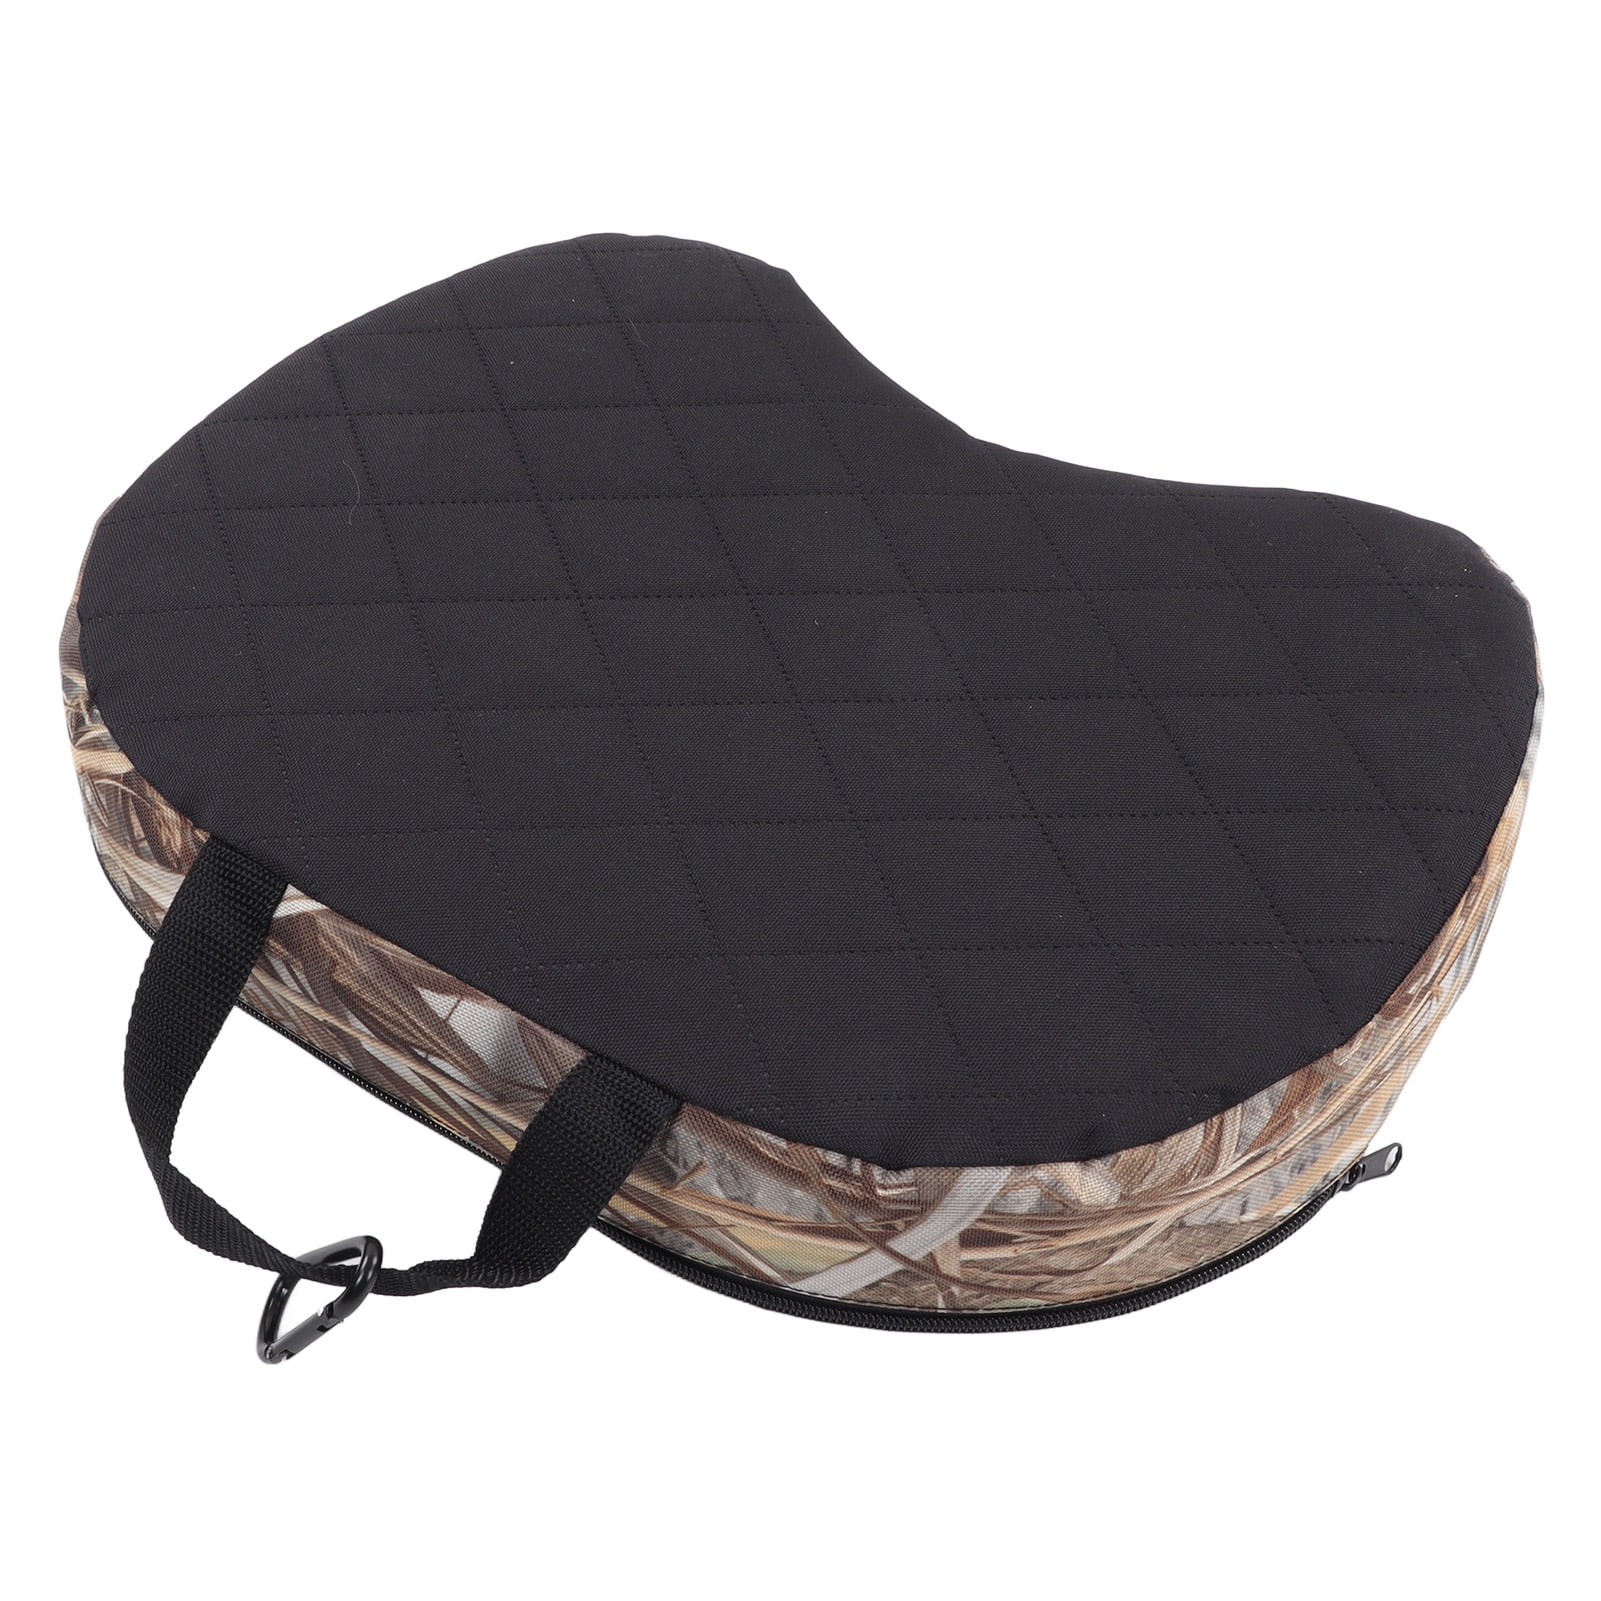 AYNEFY Outdoor Sitting Pad, Multi Functional Hunting Seat Cushion Zipper  Concave Design Foam Padded Dustproof for Picnic